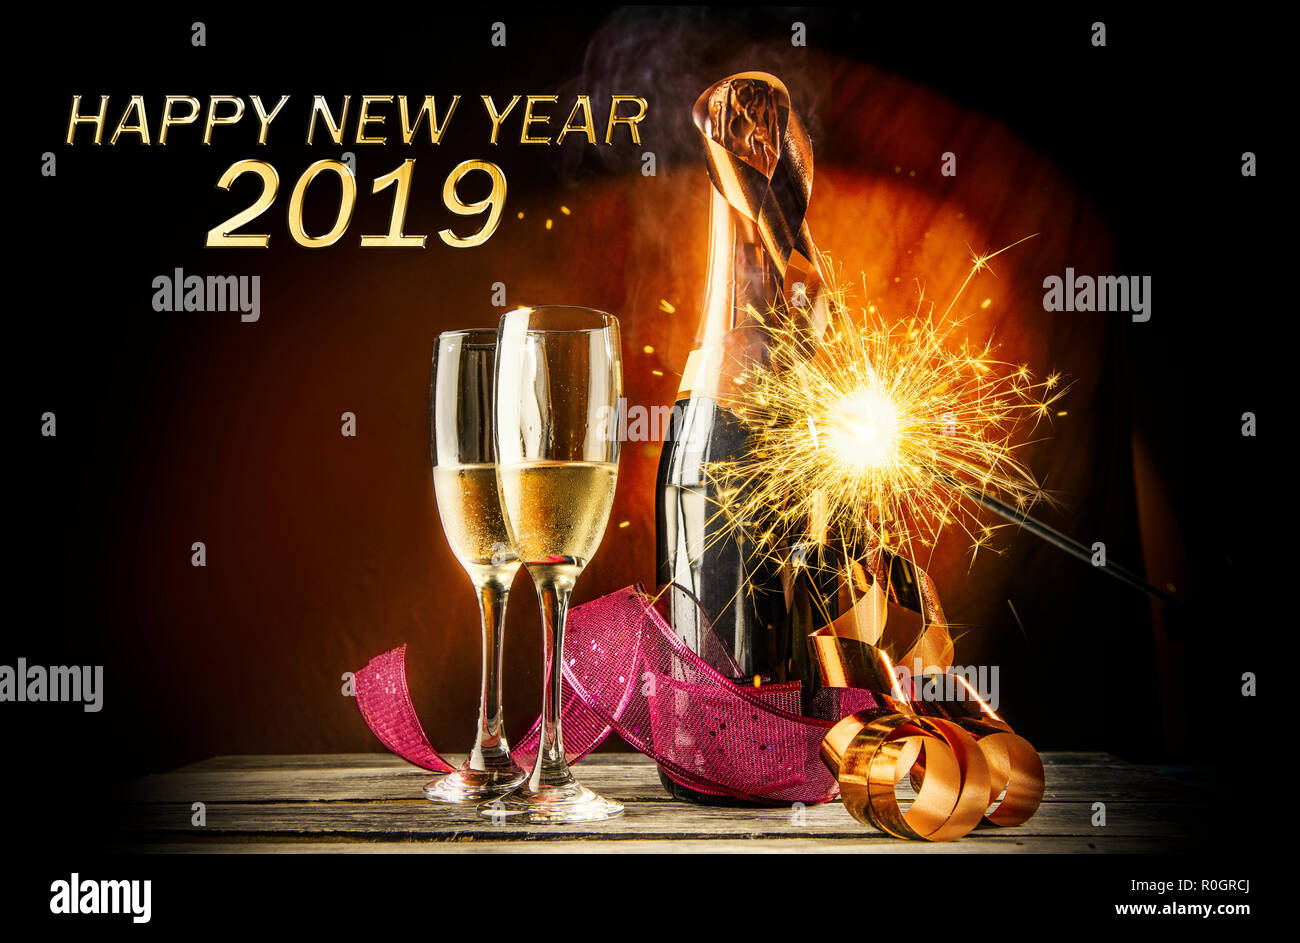 Two champagne and bottle with fireworks for new celebration. Happy New Year 2019 Stock Photo